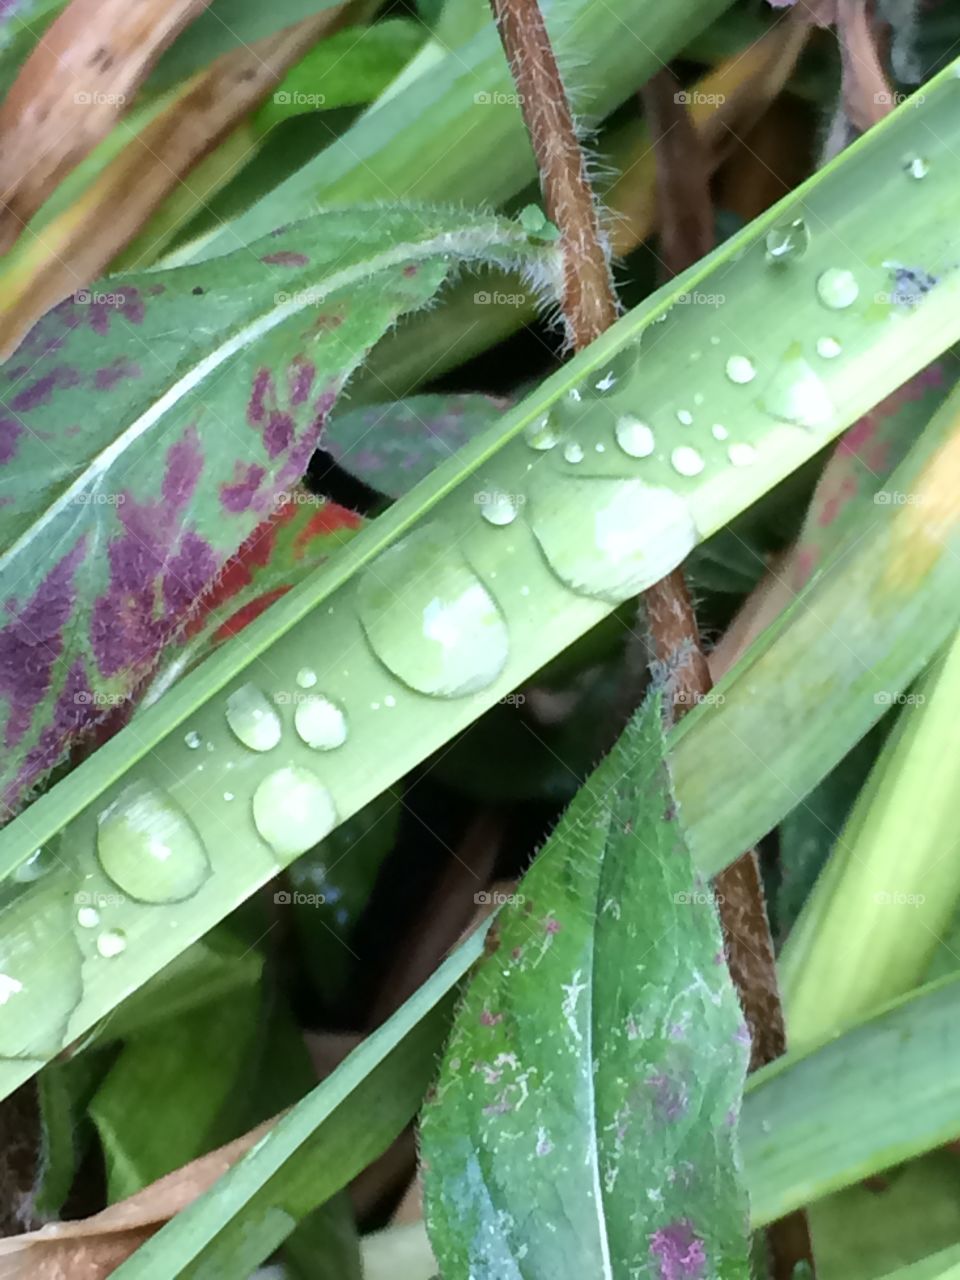 Droplets. Leaves